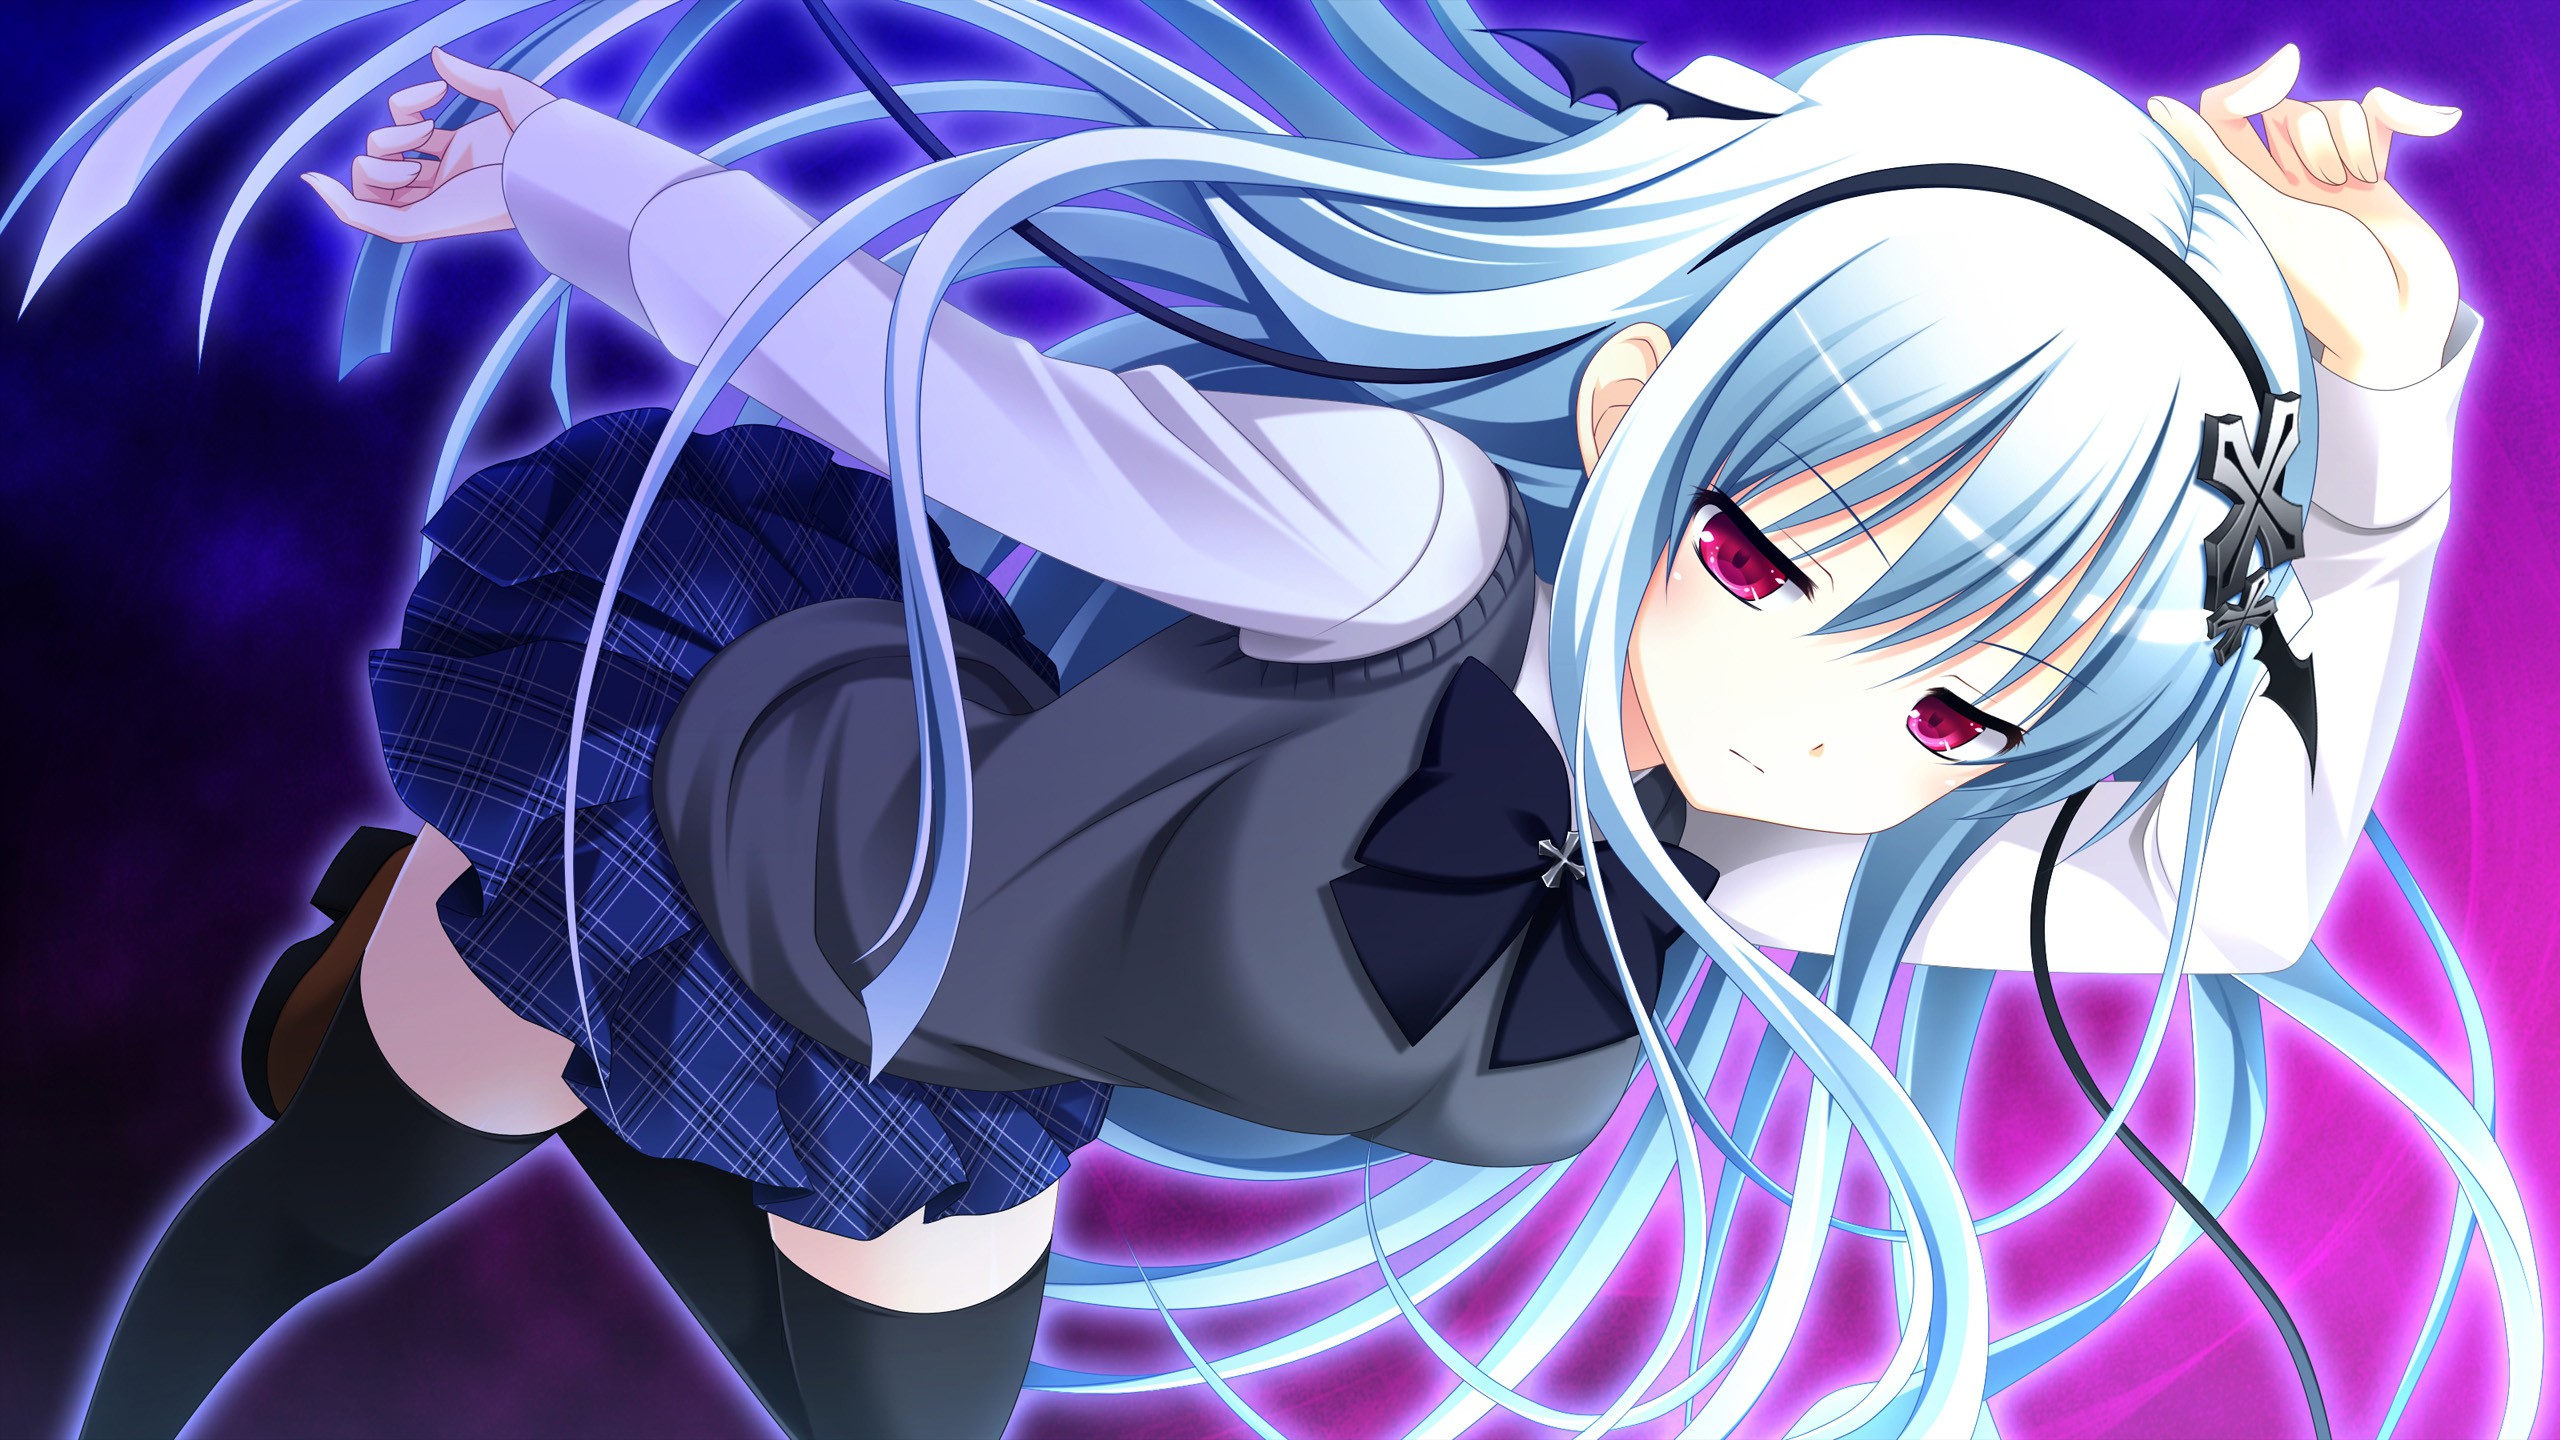 Wallpaper - Anime Girl With One Red Eye And One Blue Eye - 2560x1440  Wallpaper 